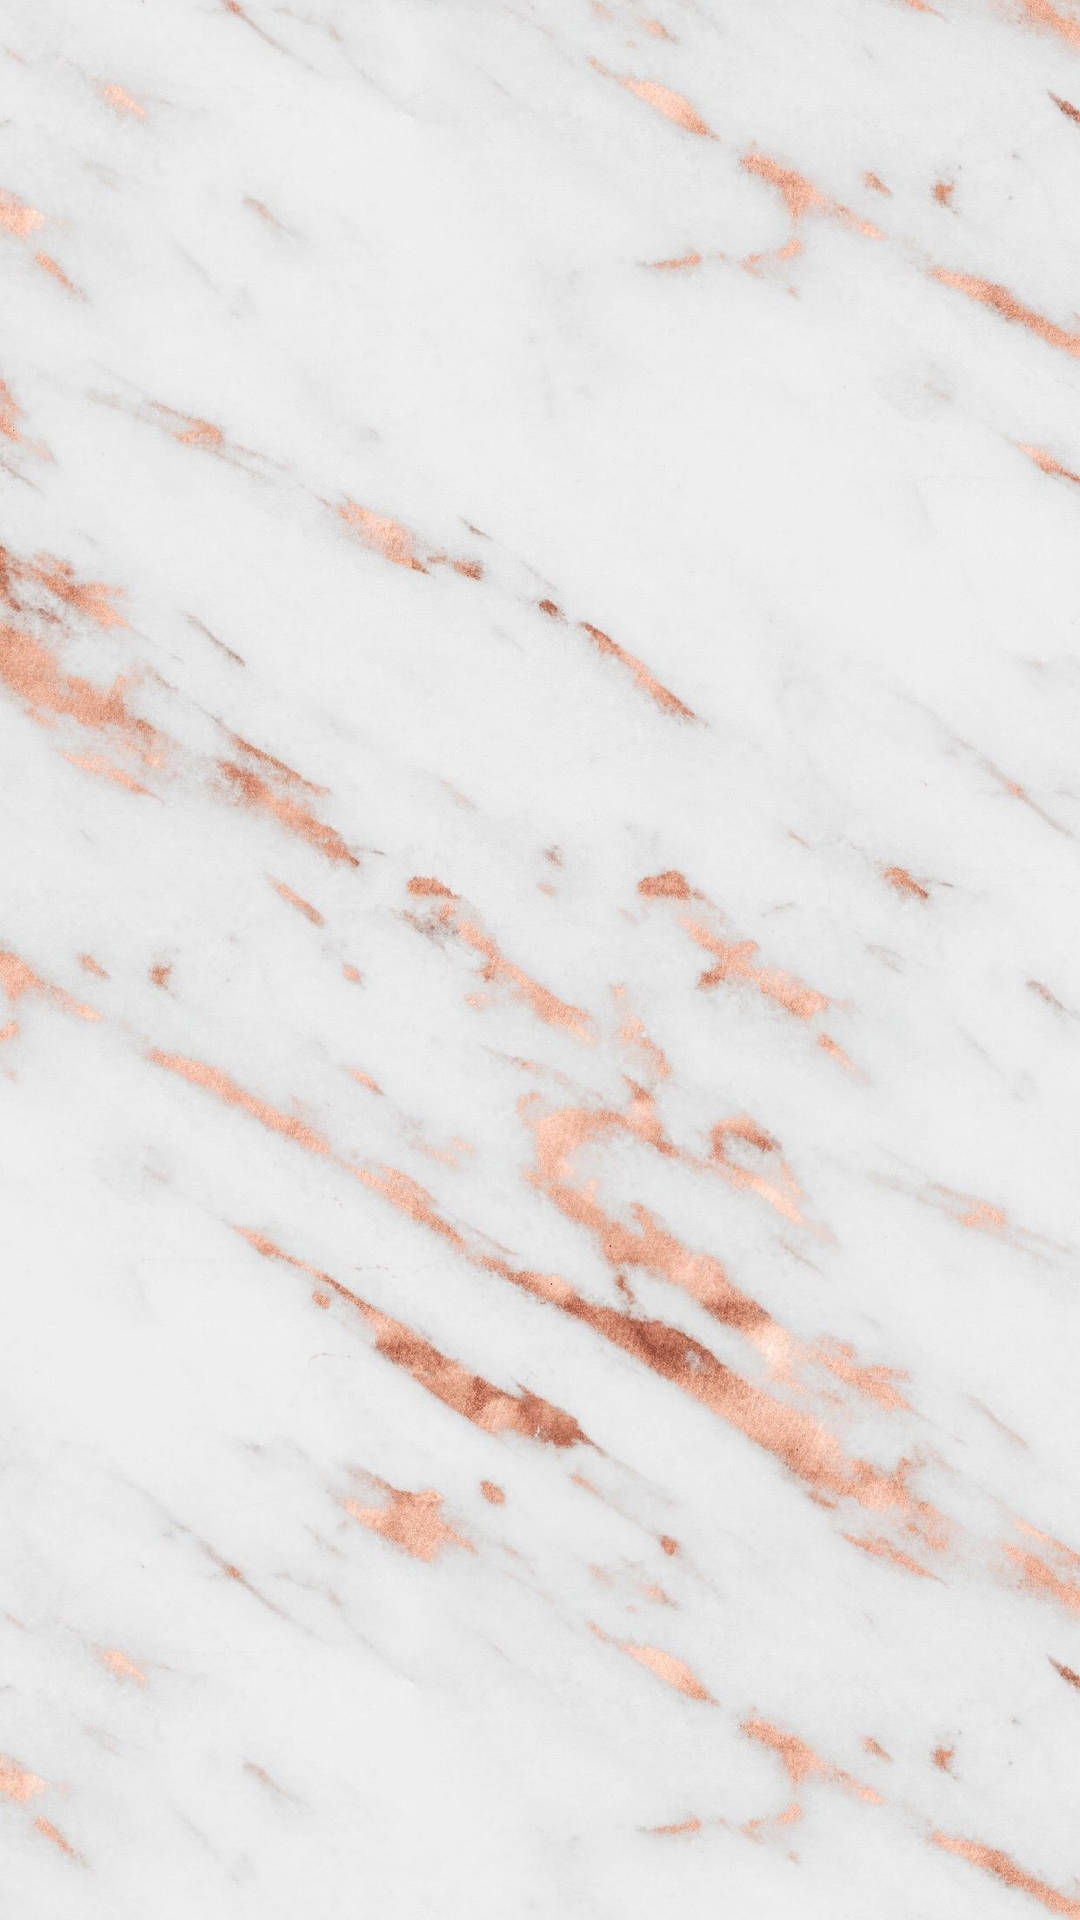 Rose Gold Marble Iphone Wallpaper